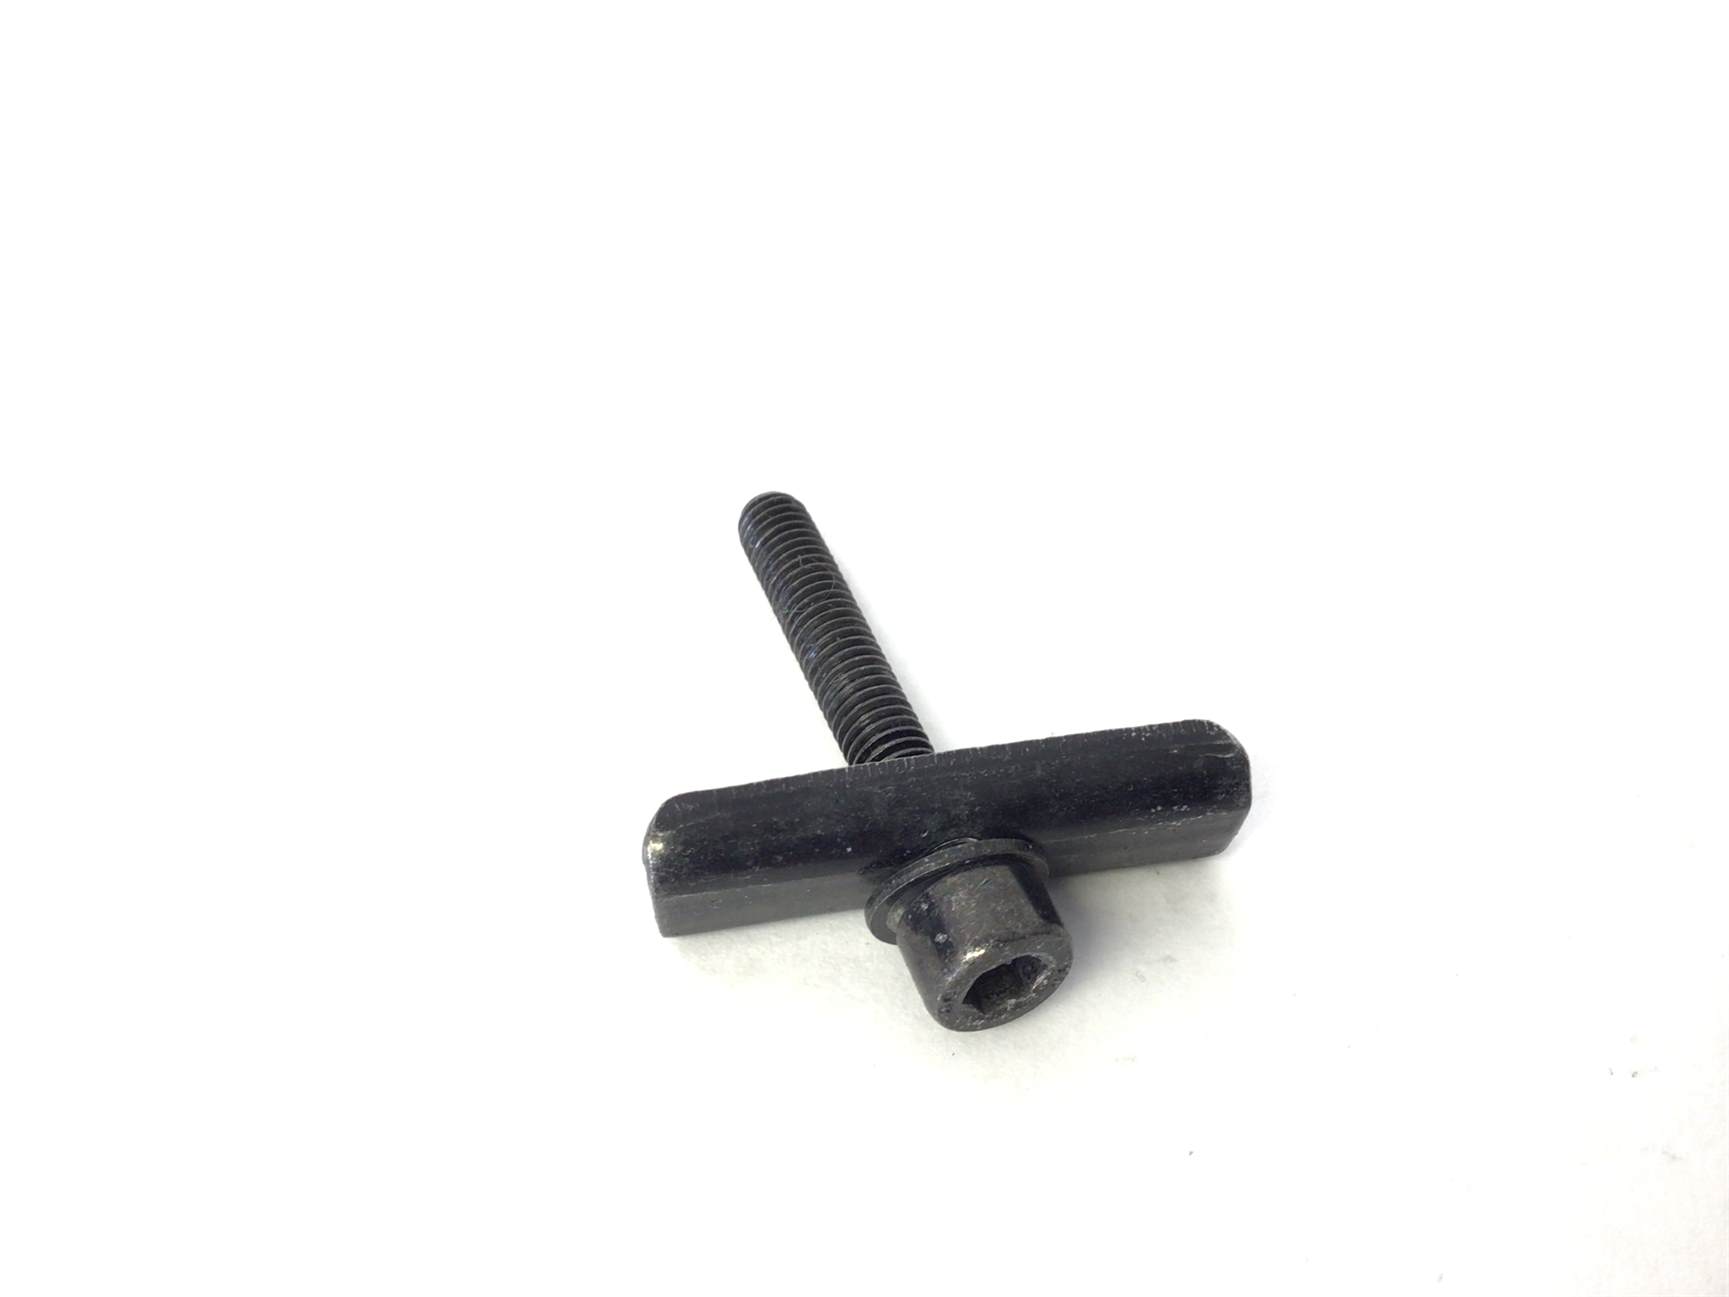 Rear Roller Bracket and Bolt Screw (Used)